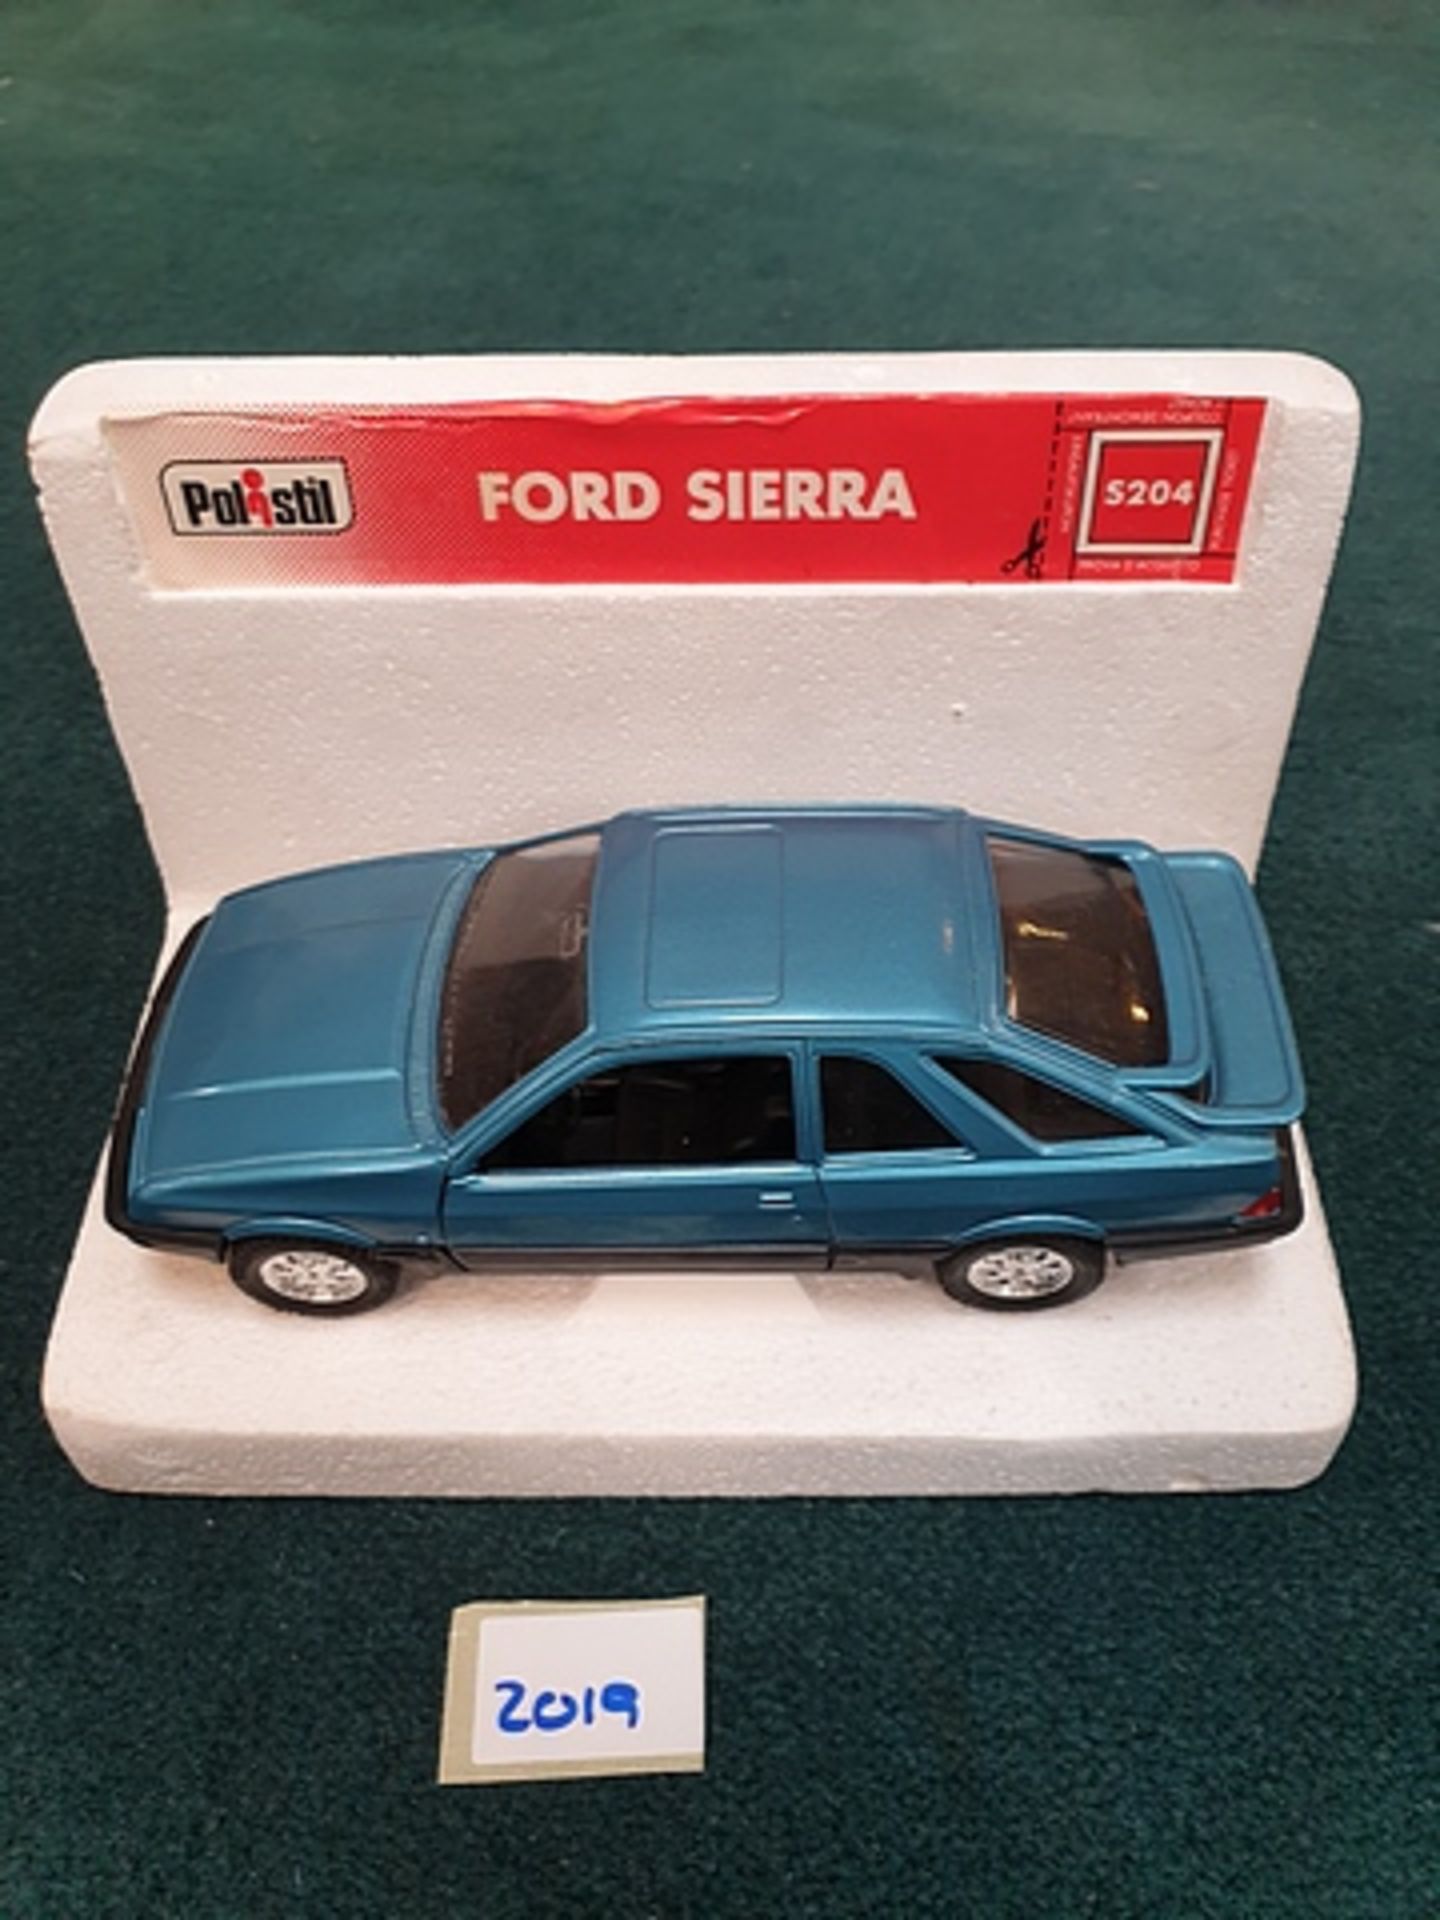 Polistil S204 Ford Sierra Xr4i 1/25 Scale Model Complete With Box